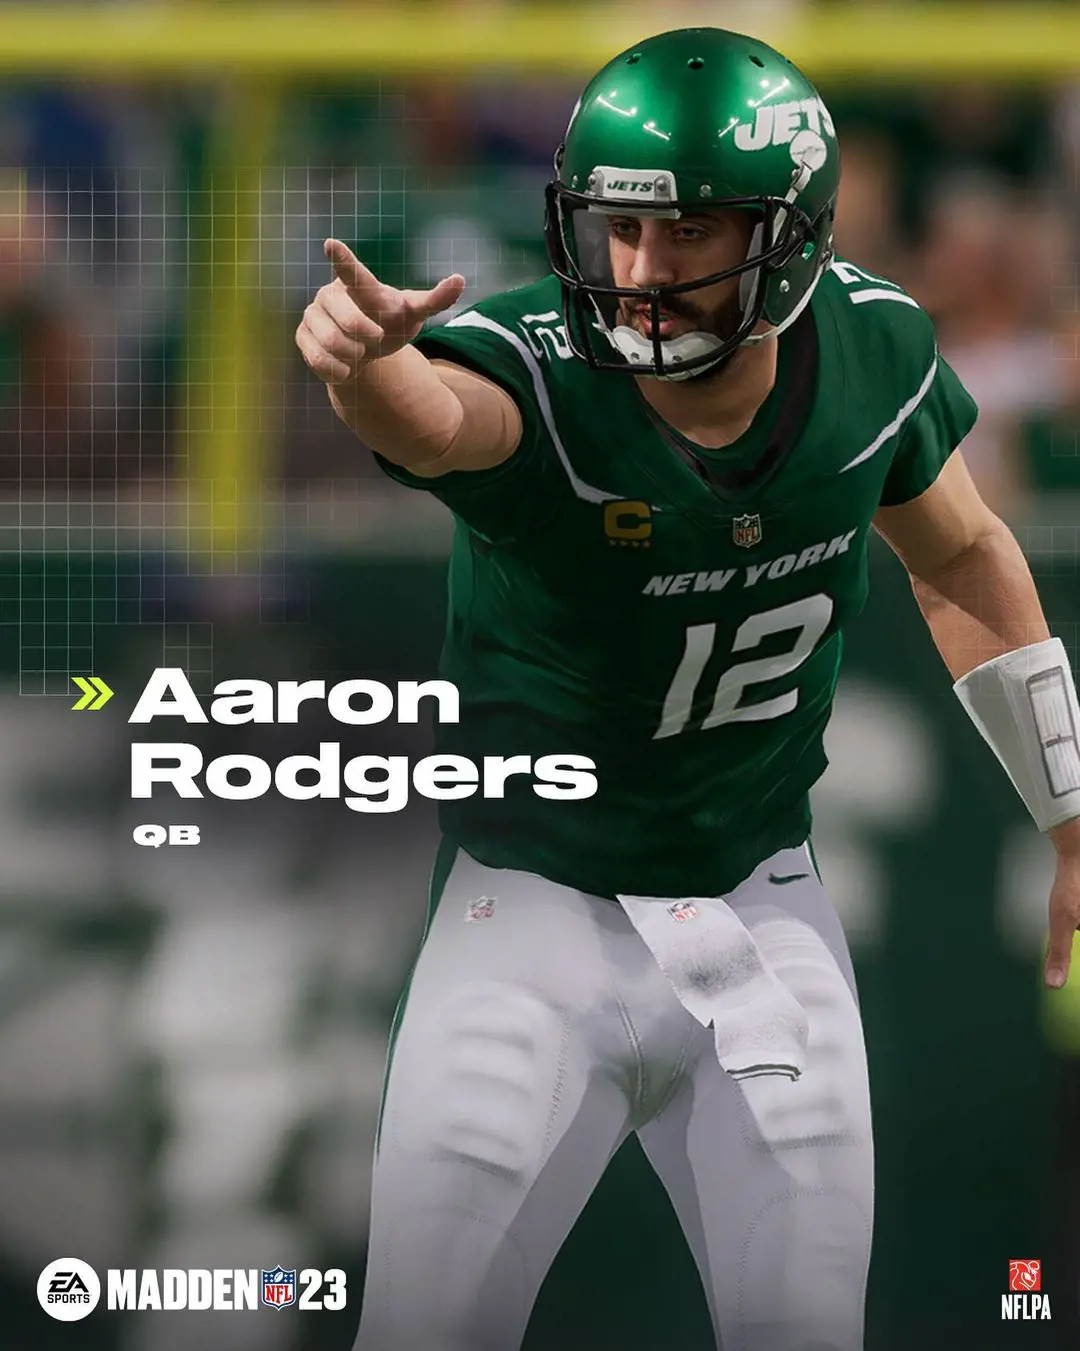 Aaron Rodgers has Slinger 1 motion in the game.